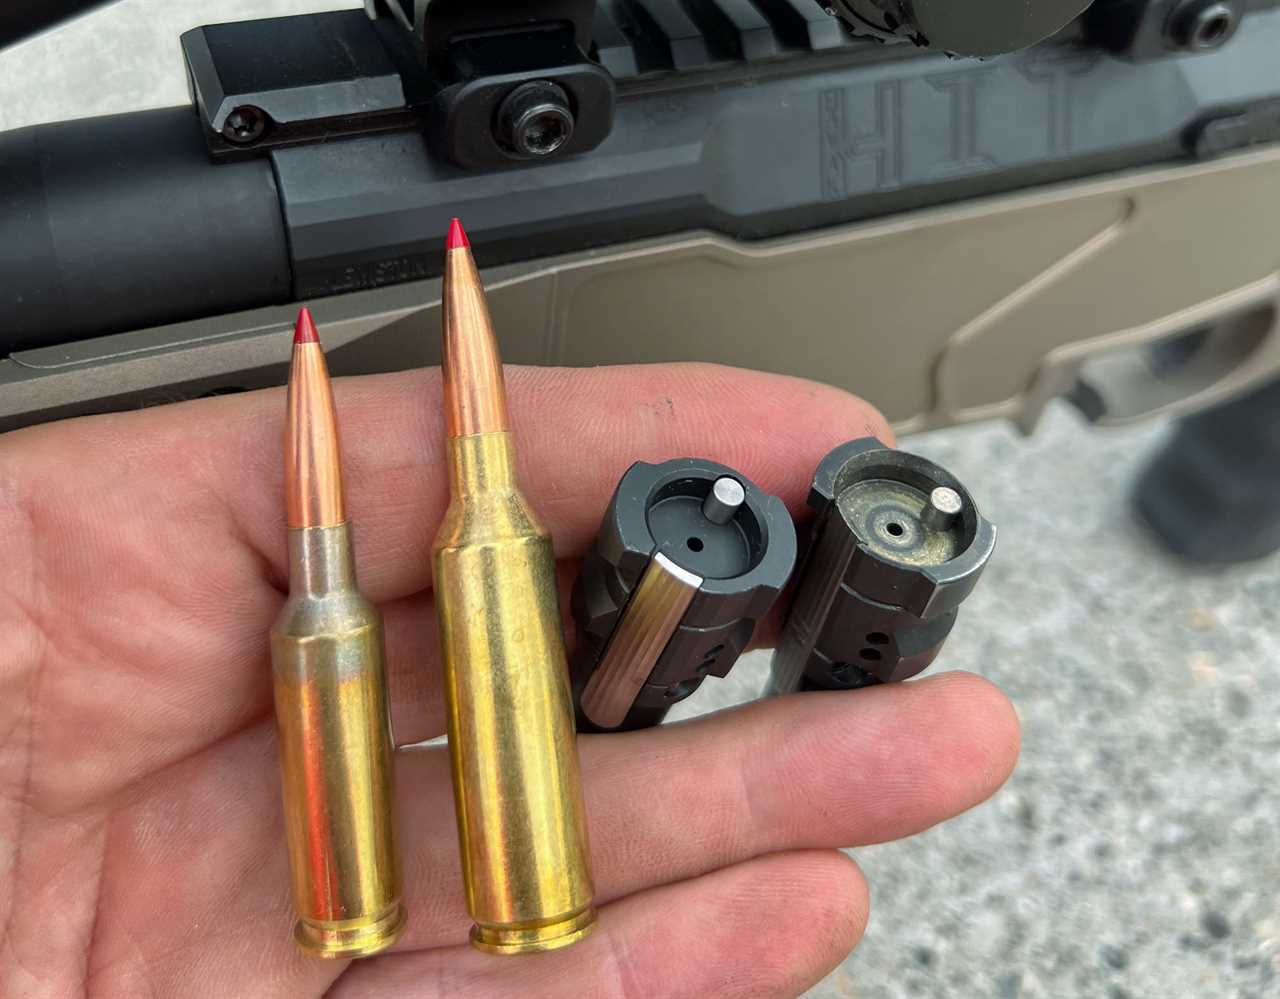 Bolt heads and cartridges in hand